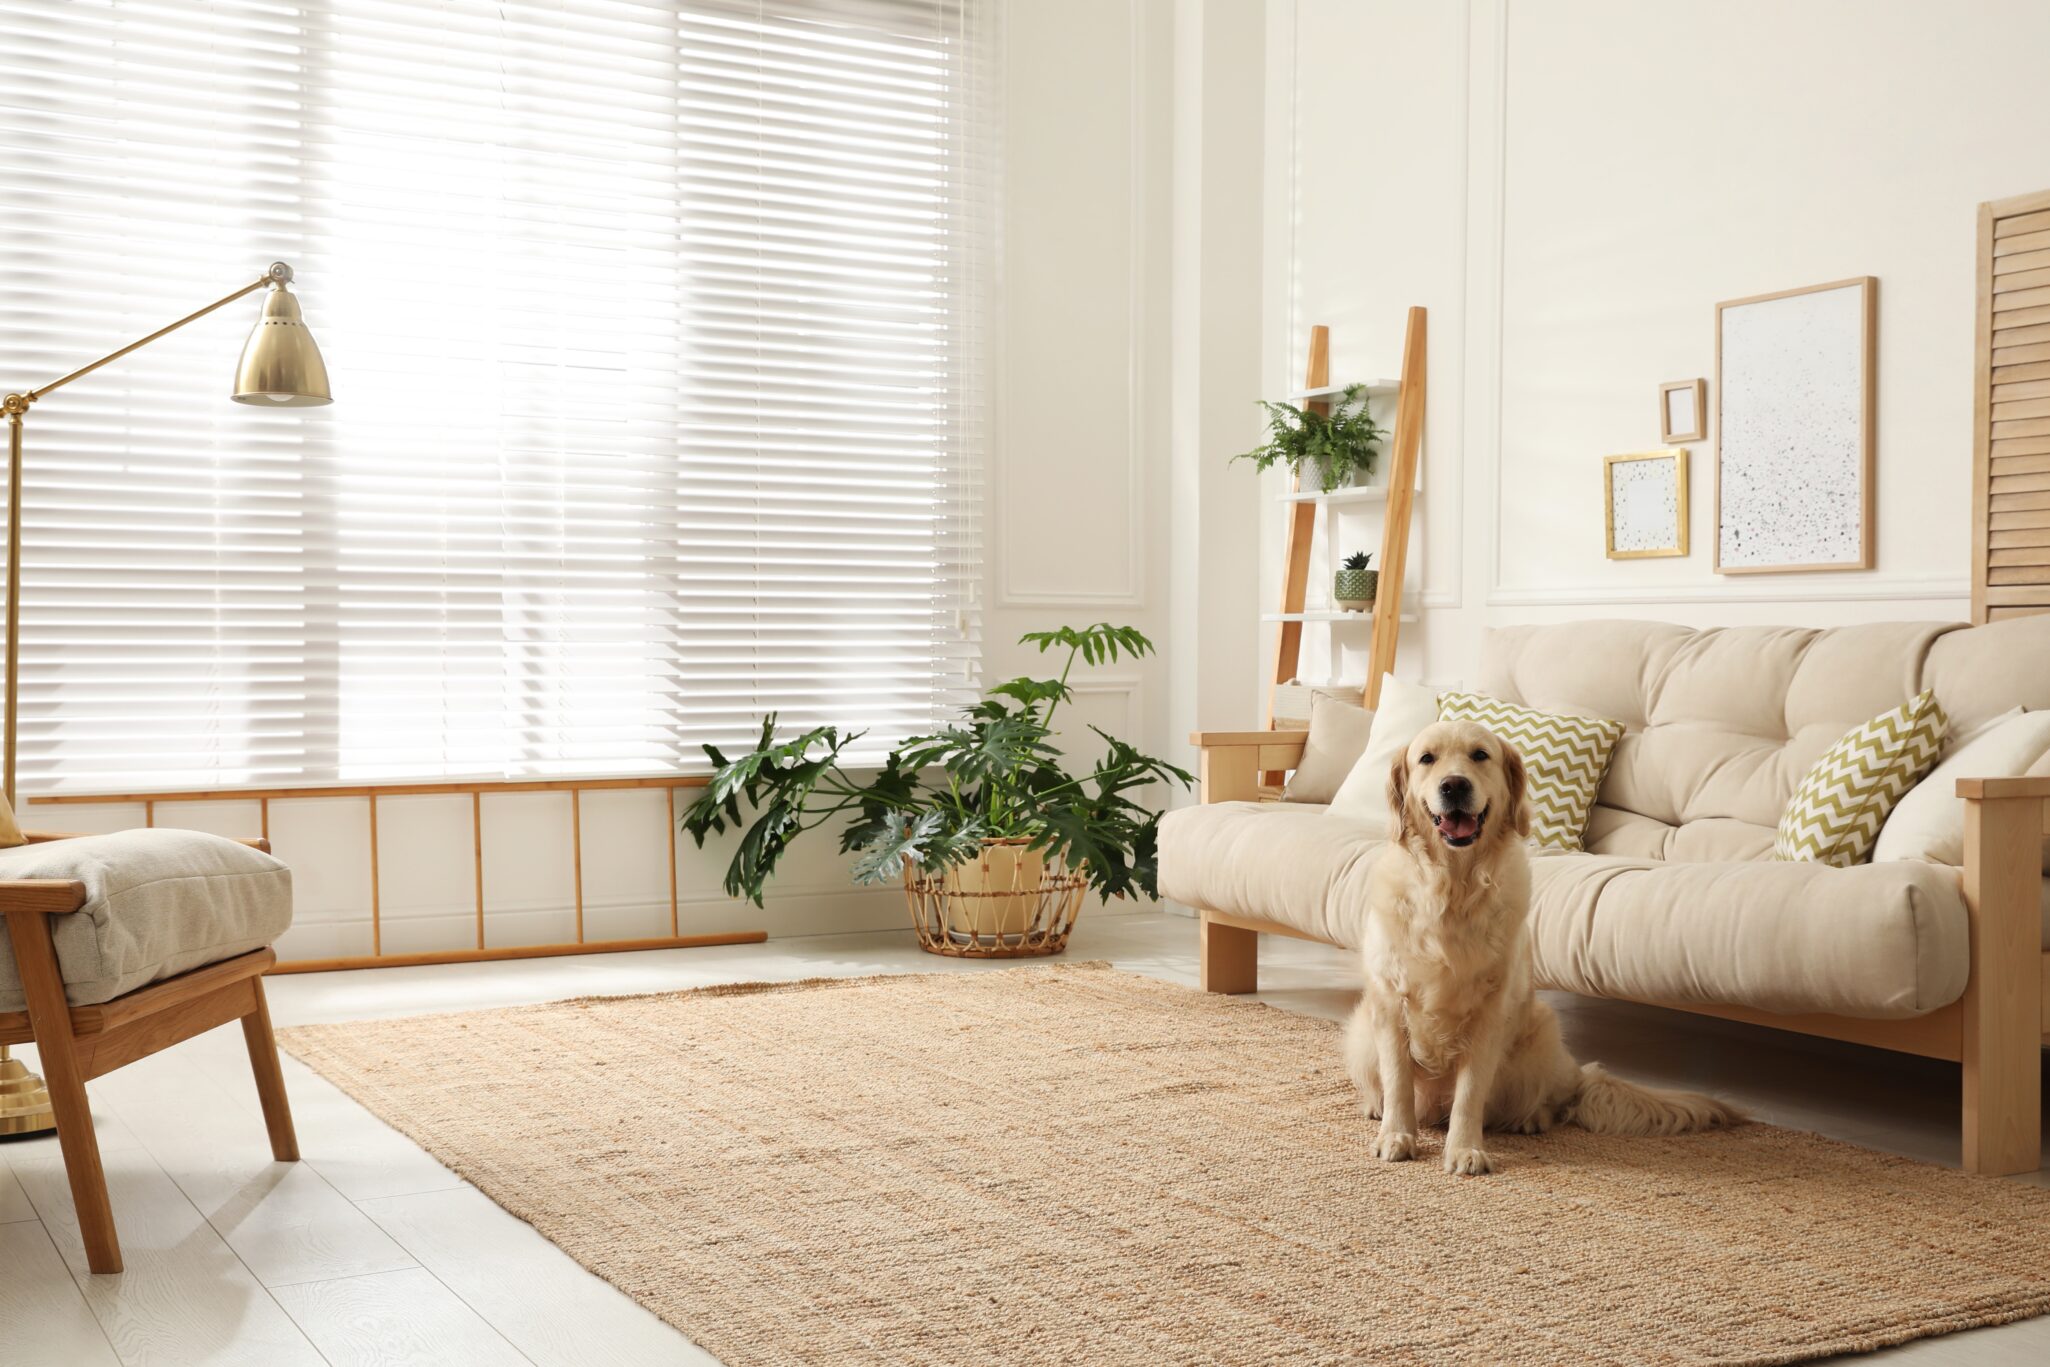 An airy living room with muted tones a cute golden retriever sitting next to the couch